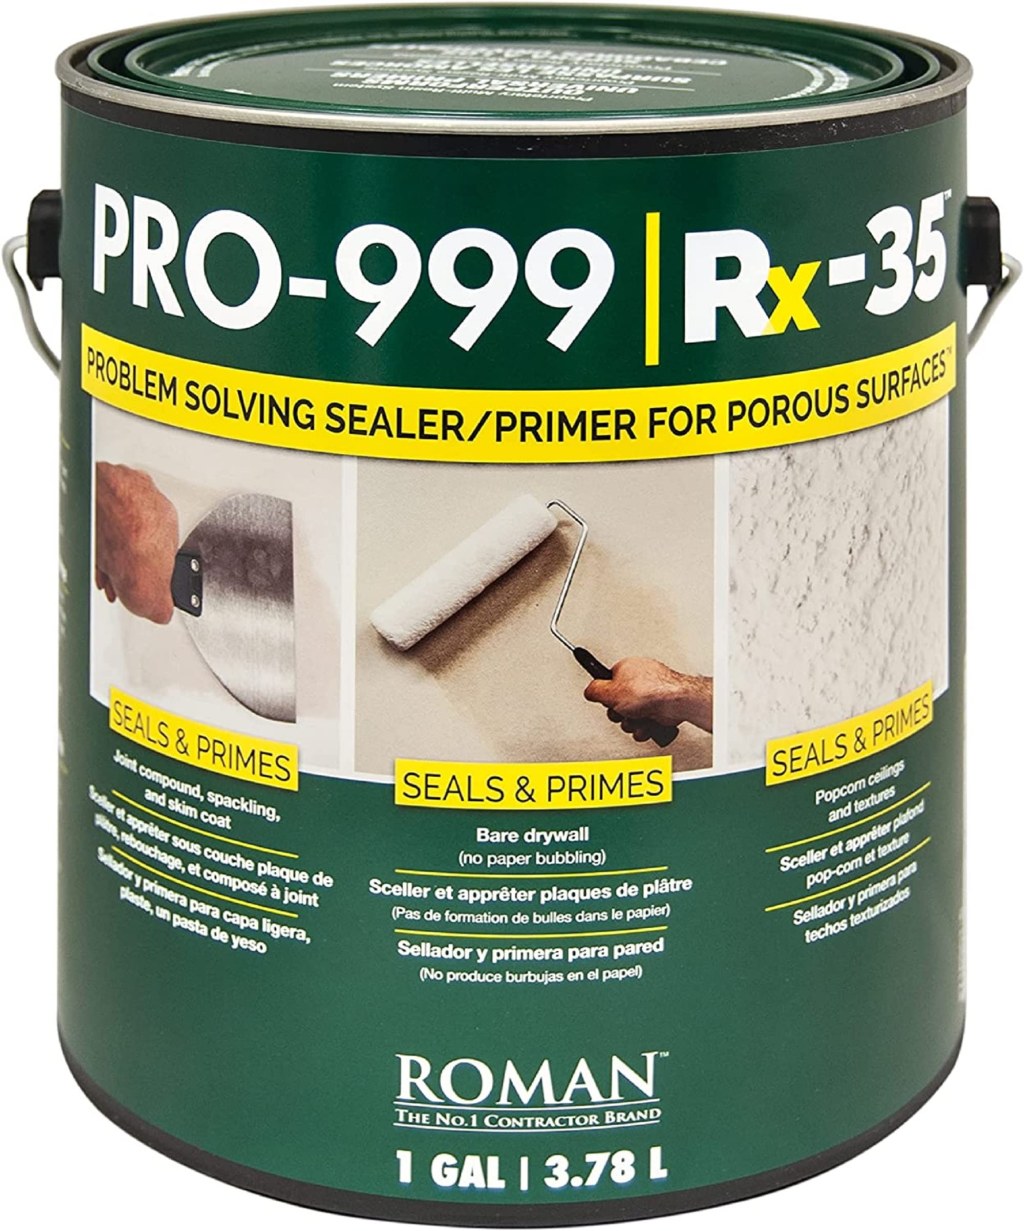 Picture of: ROMAN Rx- Sealer/Primer for Torn Drywall, Skim Coat, and